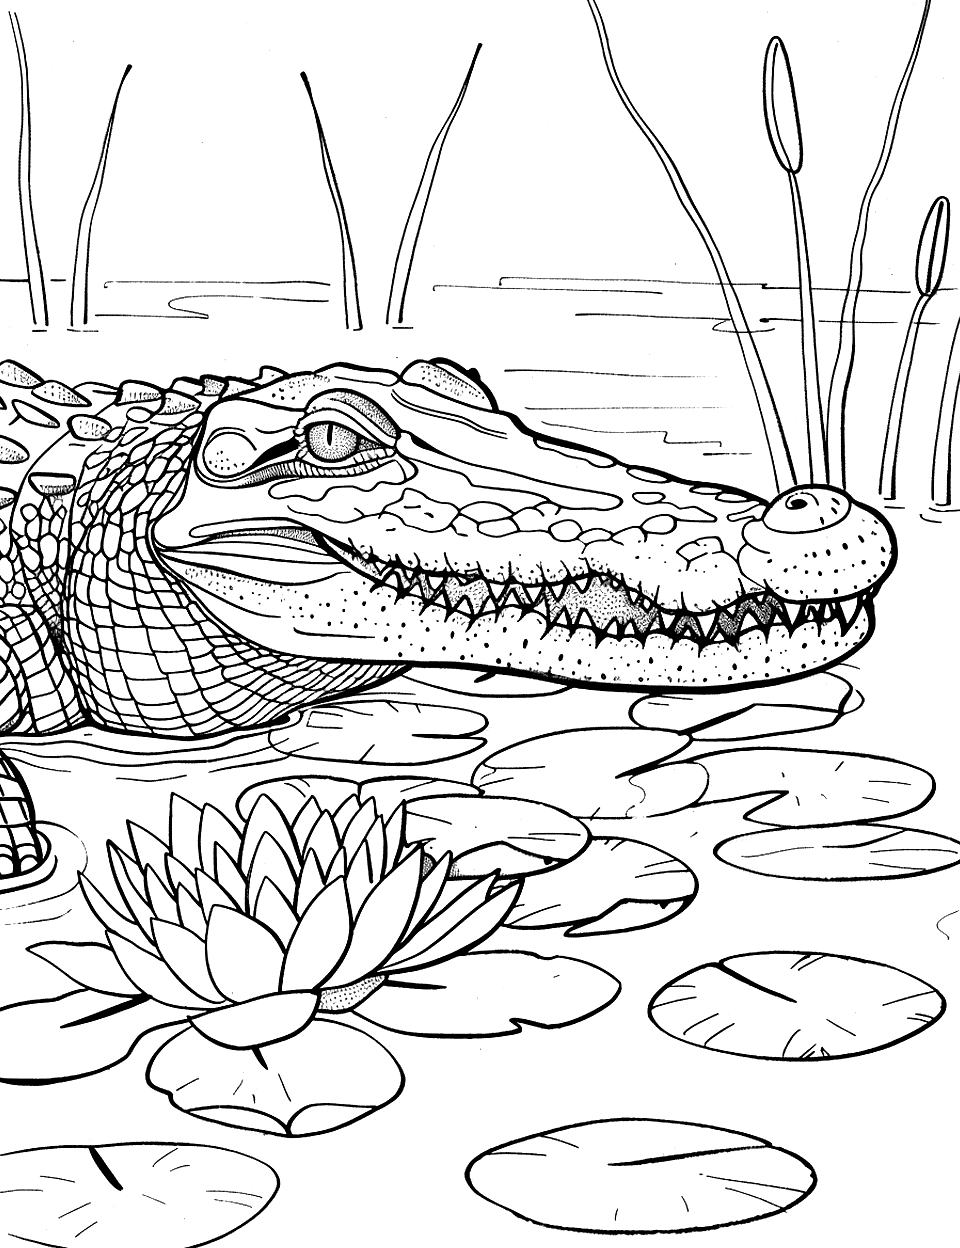 Crocodile and Water Lilies Coloring Page - A crocodile peeking through a patch of water lilies.